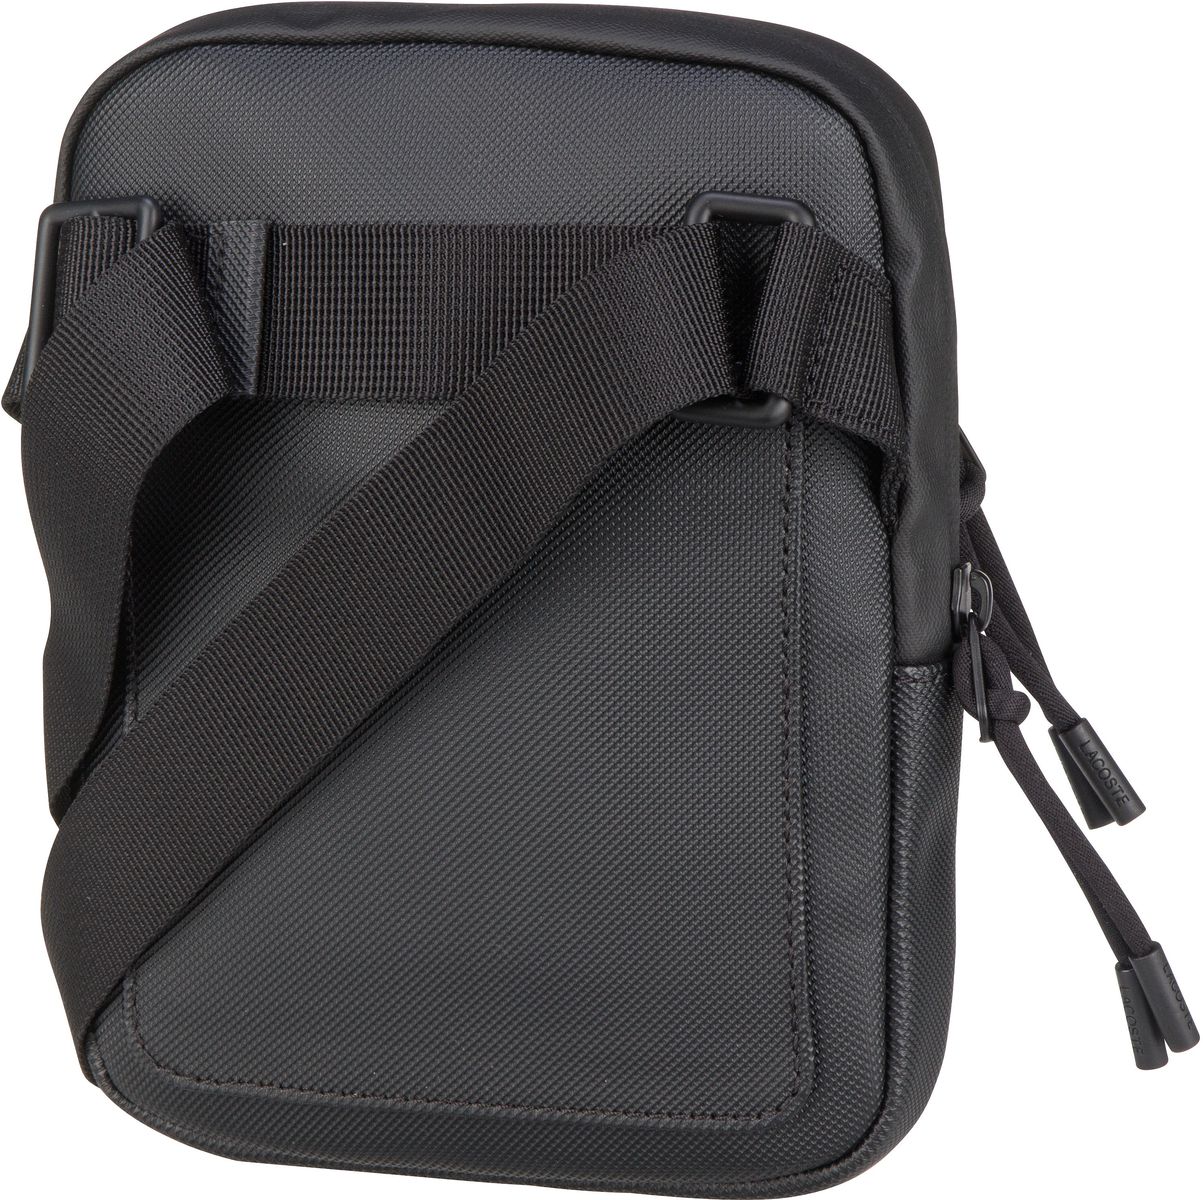 Lacoste LCST Crossover Bag 3307 - Black